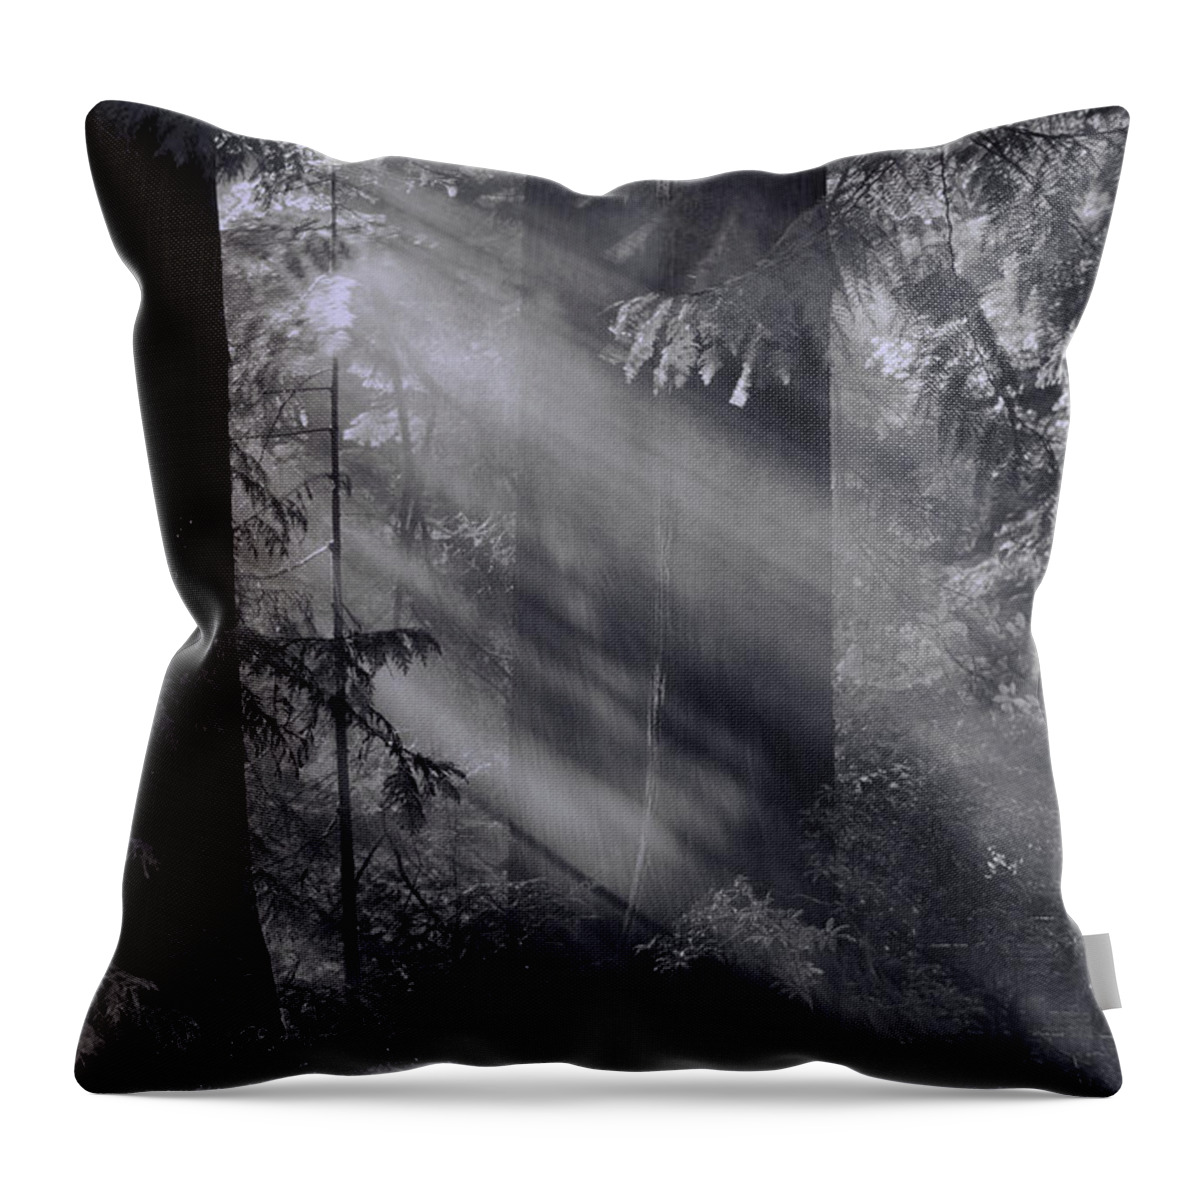  Throw Pillow featuring the photograph Let There Be Light #2 by Don Schwartz